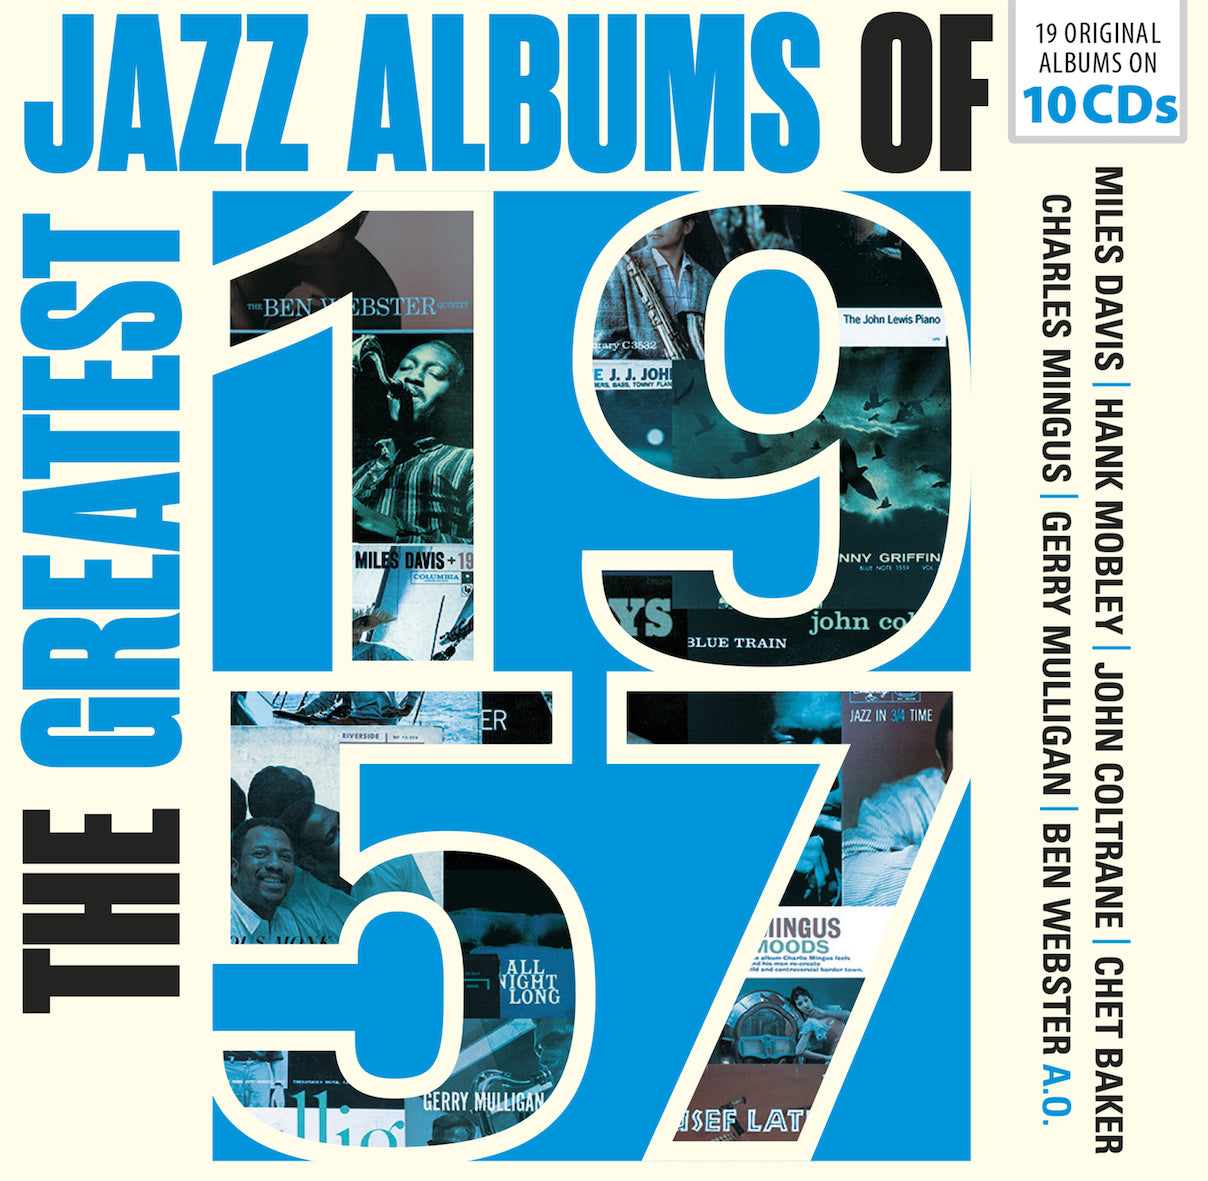 THE GREATEST JAZZ ALBUMS OF 1957 (10 CDS)